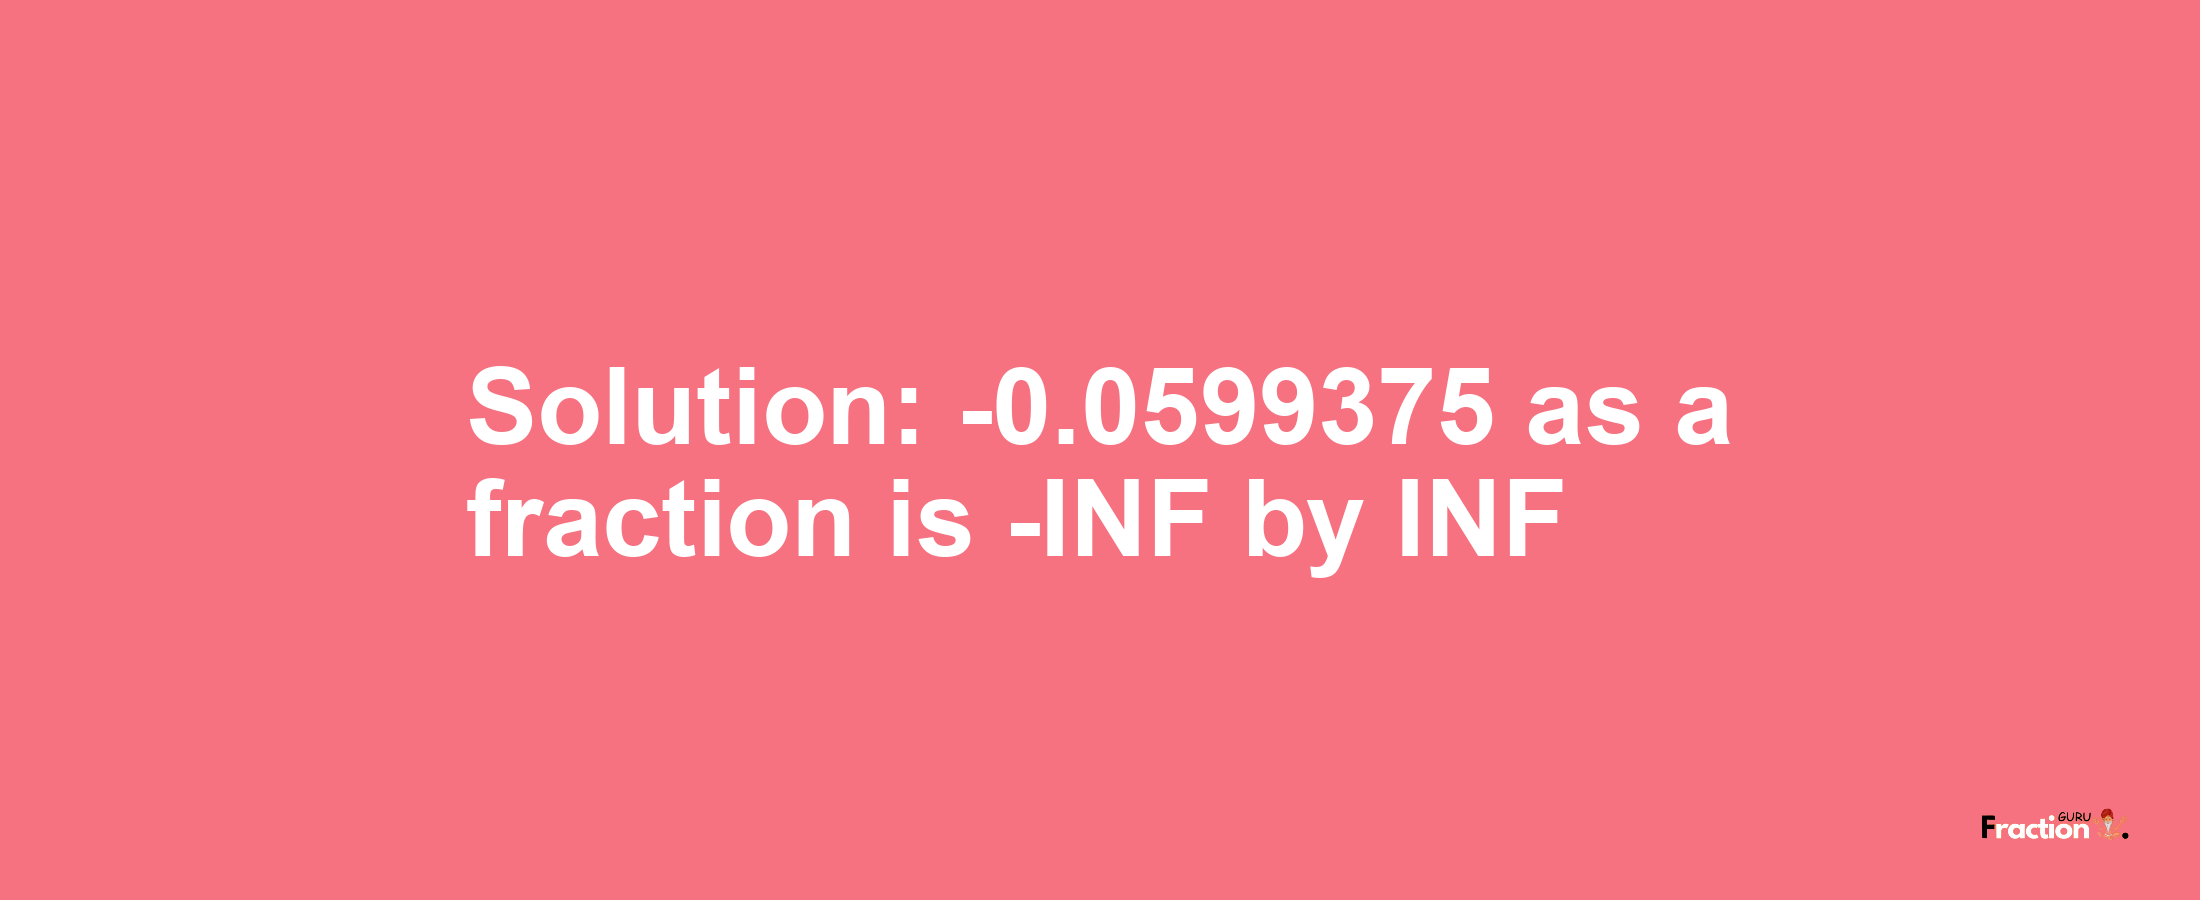 Solution:-0.0599375 as a fraction is -INF/INF